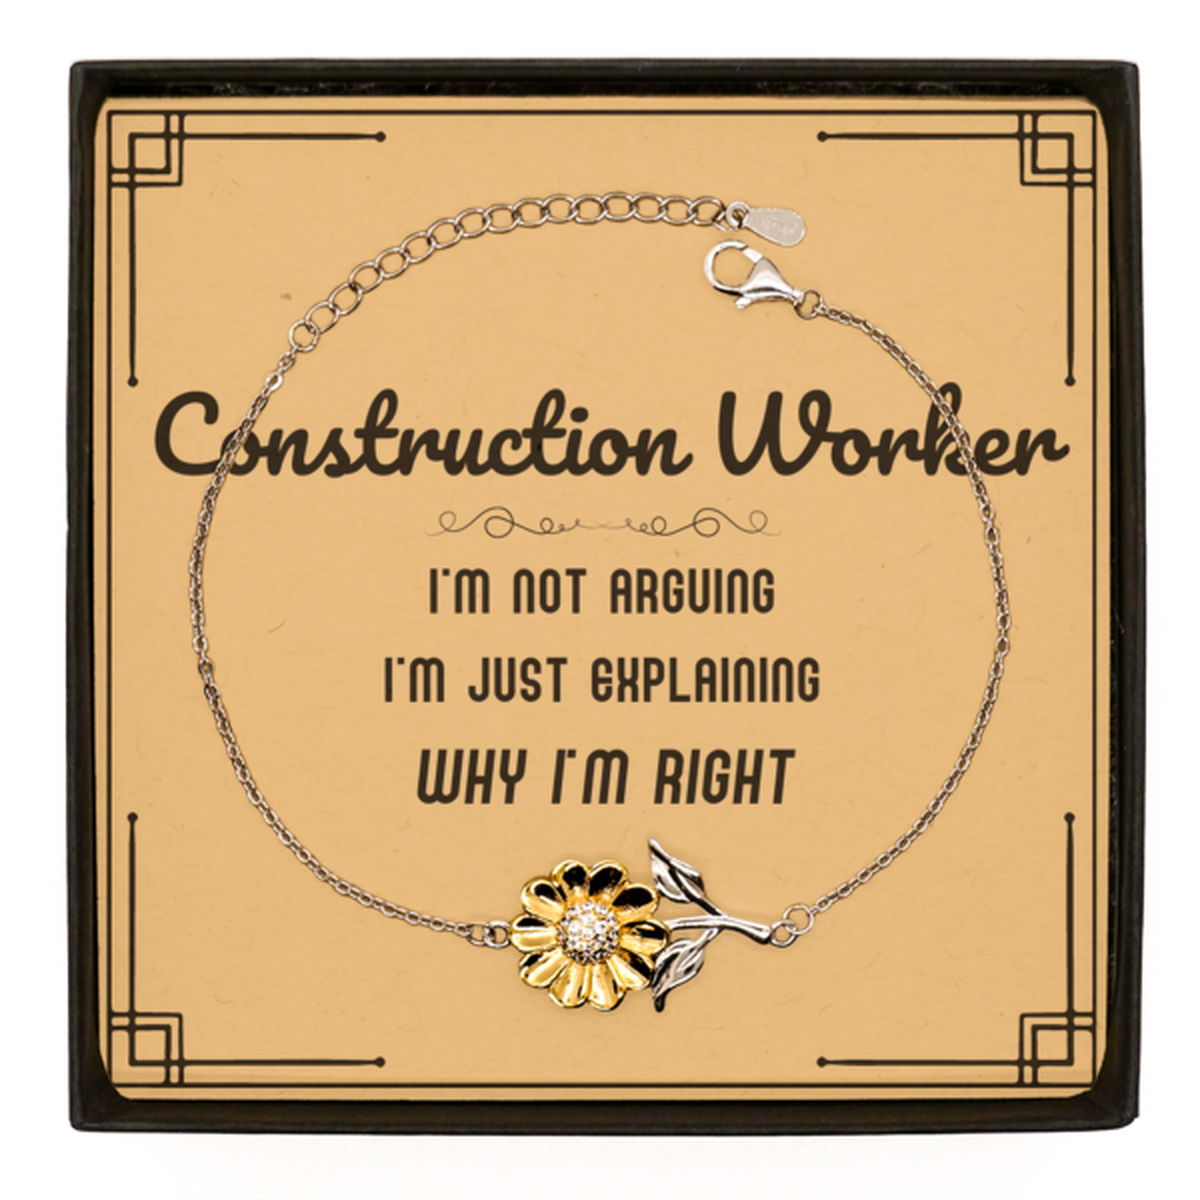 Construction Worker I'm not Arguing. I'm Just Explaining Why I'm RIGHT Sunflower Bracelet, Funny Saying Quote Construction Worker Gifts For Construction Worker Message Card Graduation Birthday Christmas Gifts for Men Women Coworker